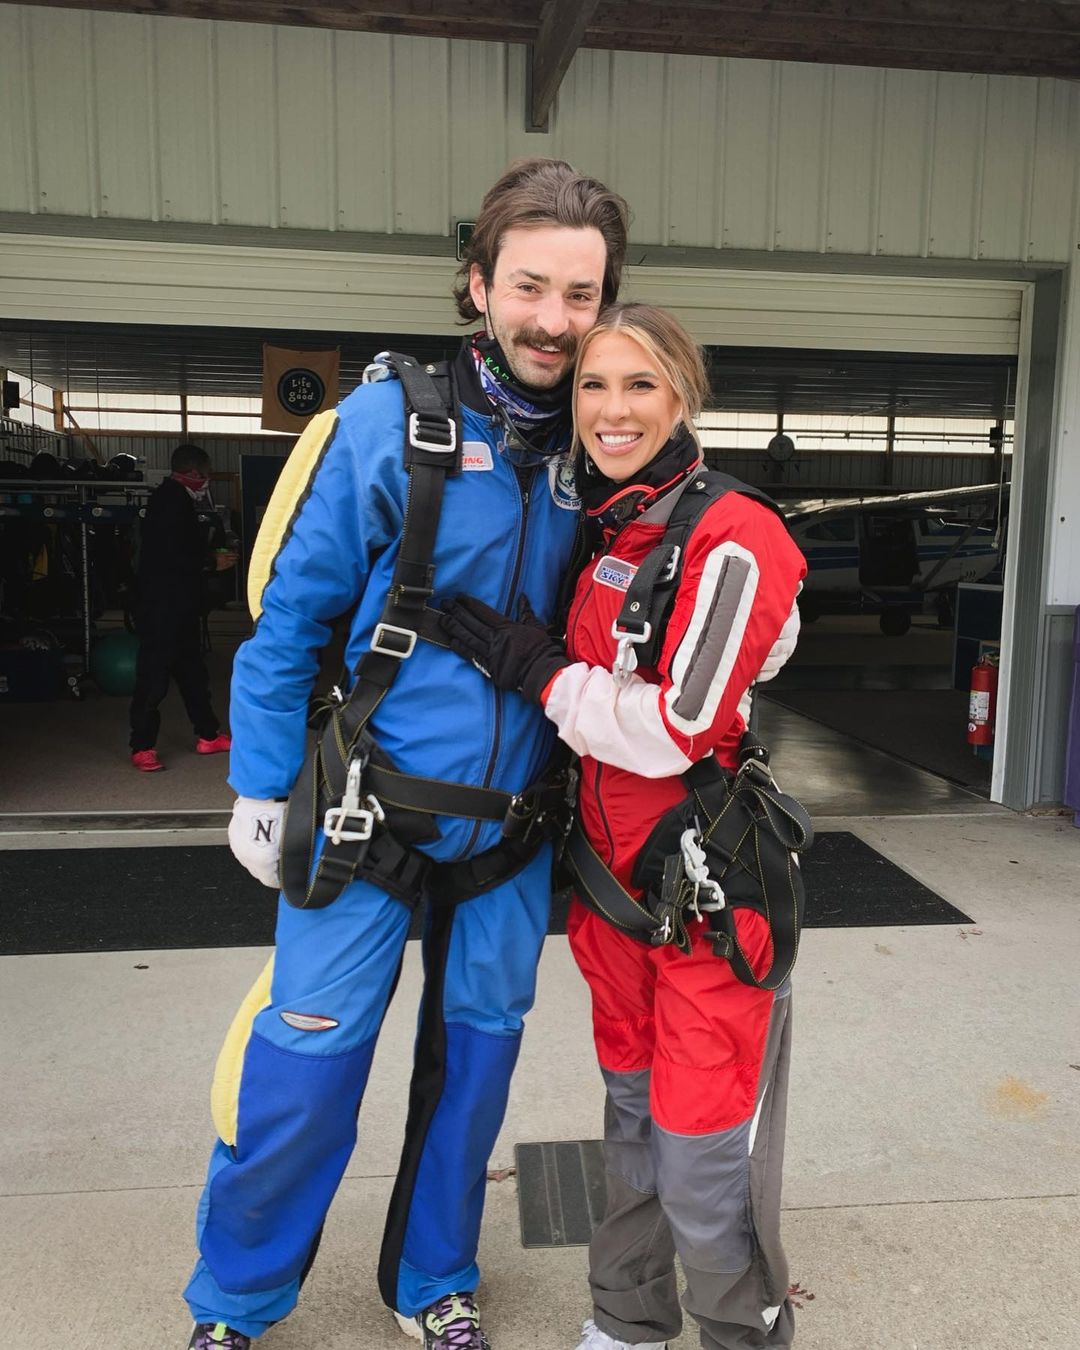 emmycoop and twoeyejacks excited to skydive for the first time at Wisconsin Skydiving Center near Milwaukee